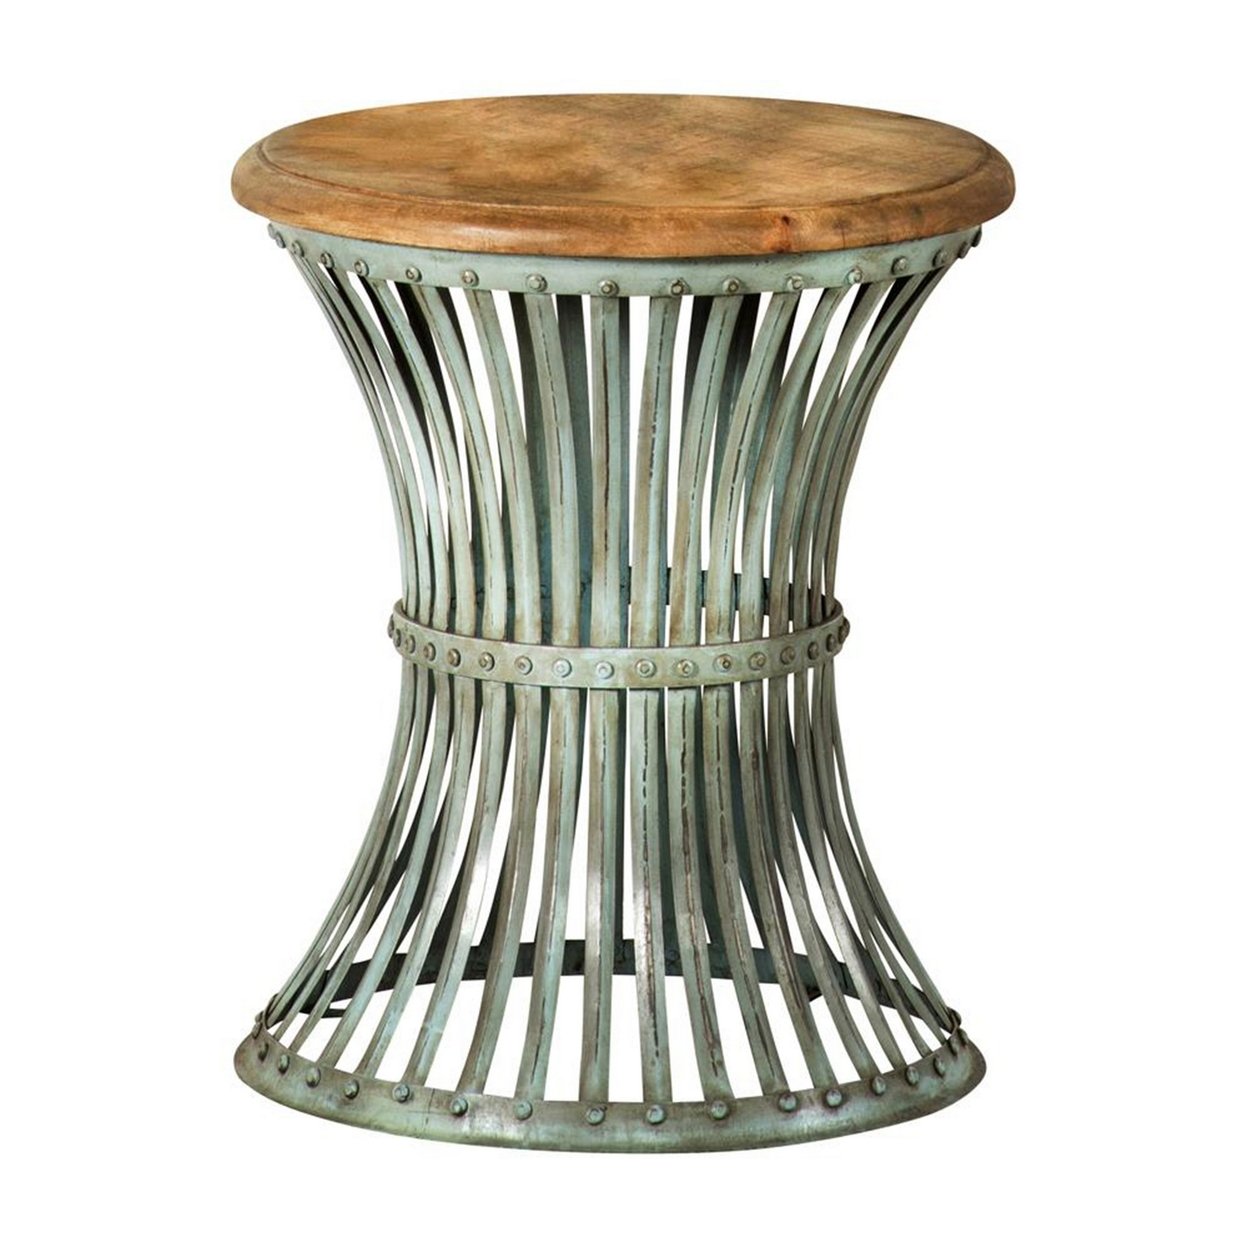 24 Inch Wood Round Accent Table With Hourglass Metal Base, Distressed Blue - Saltoro Sherpi